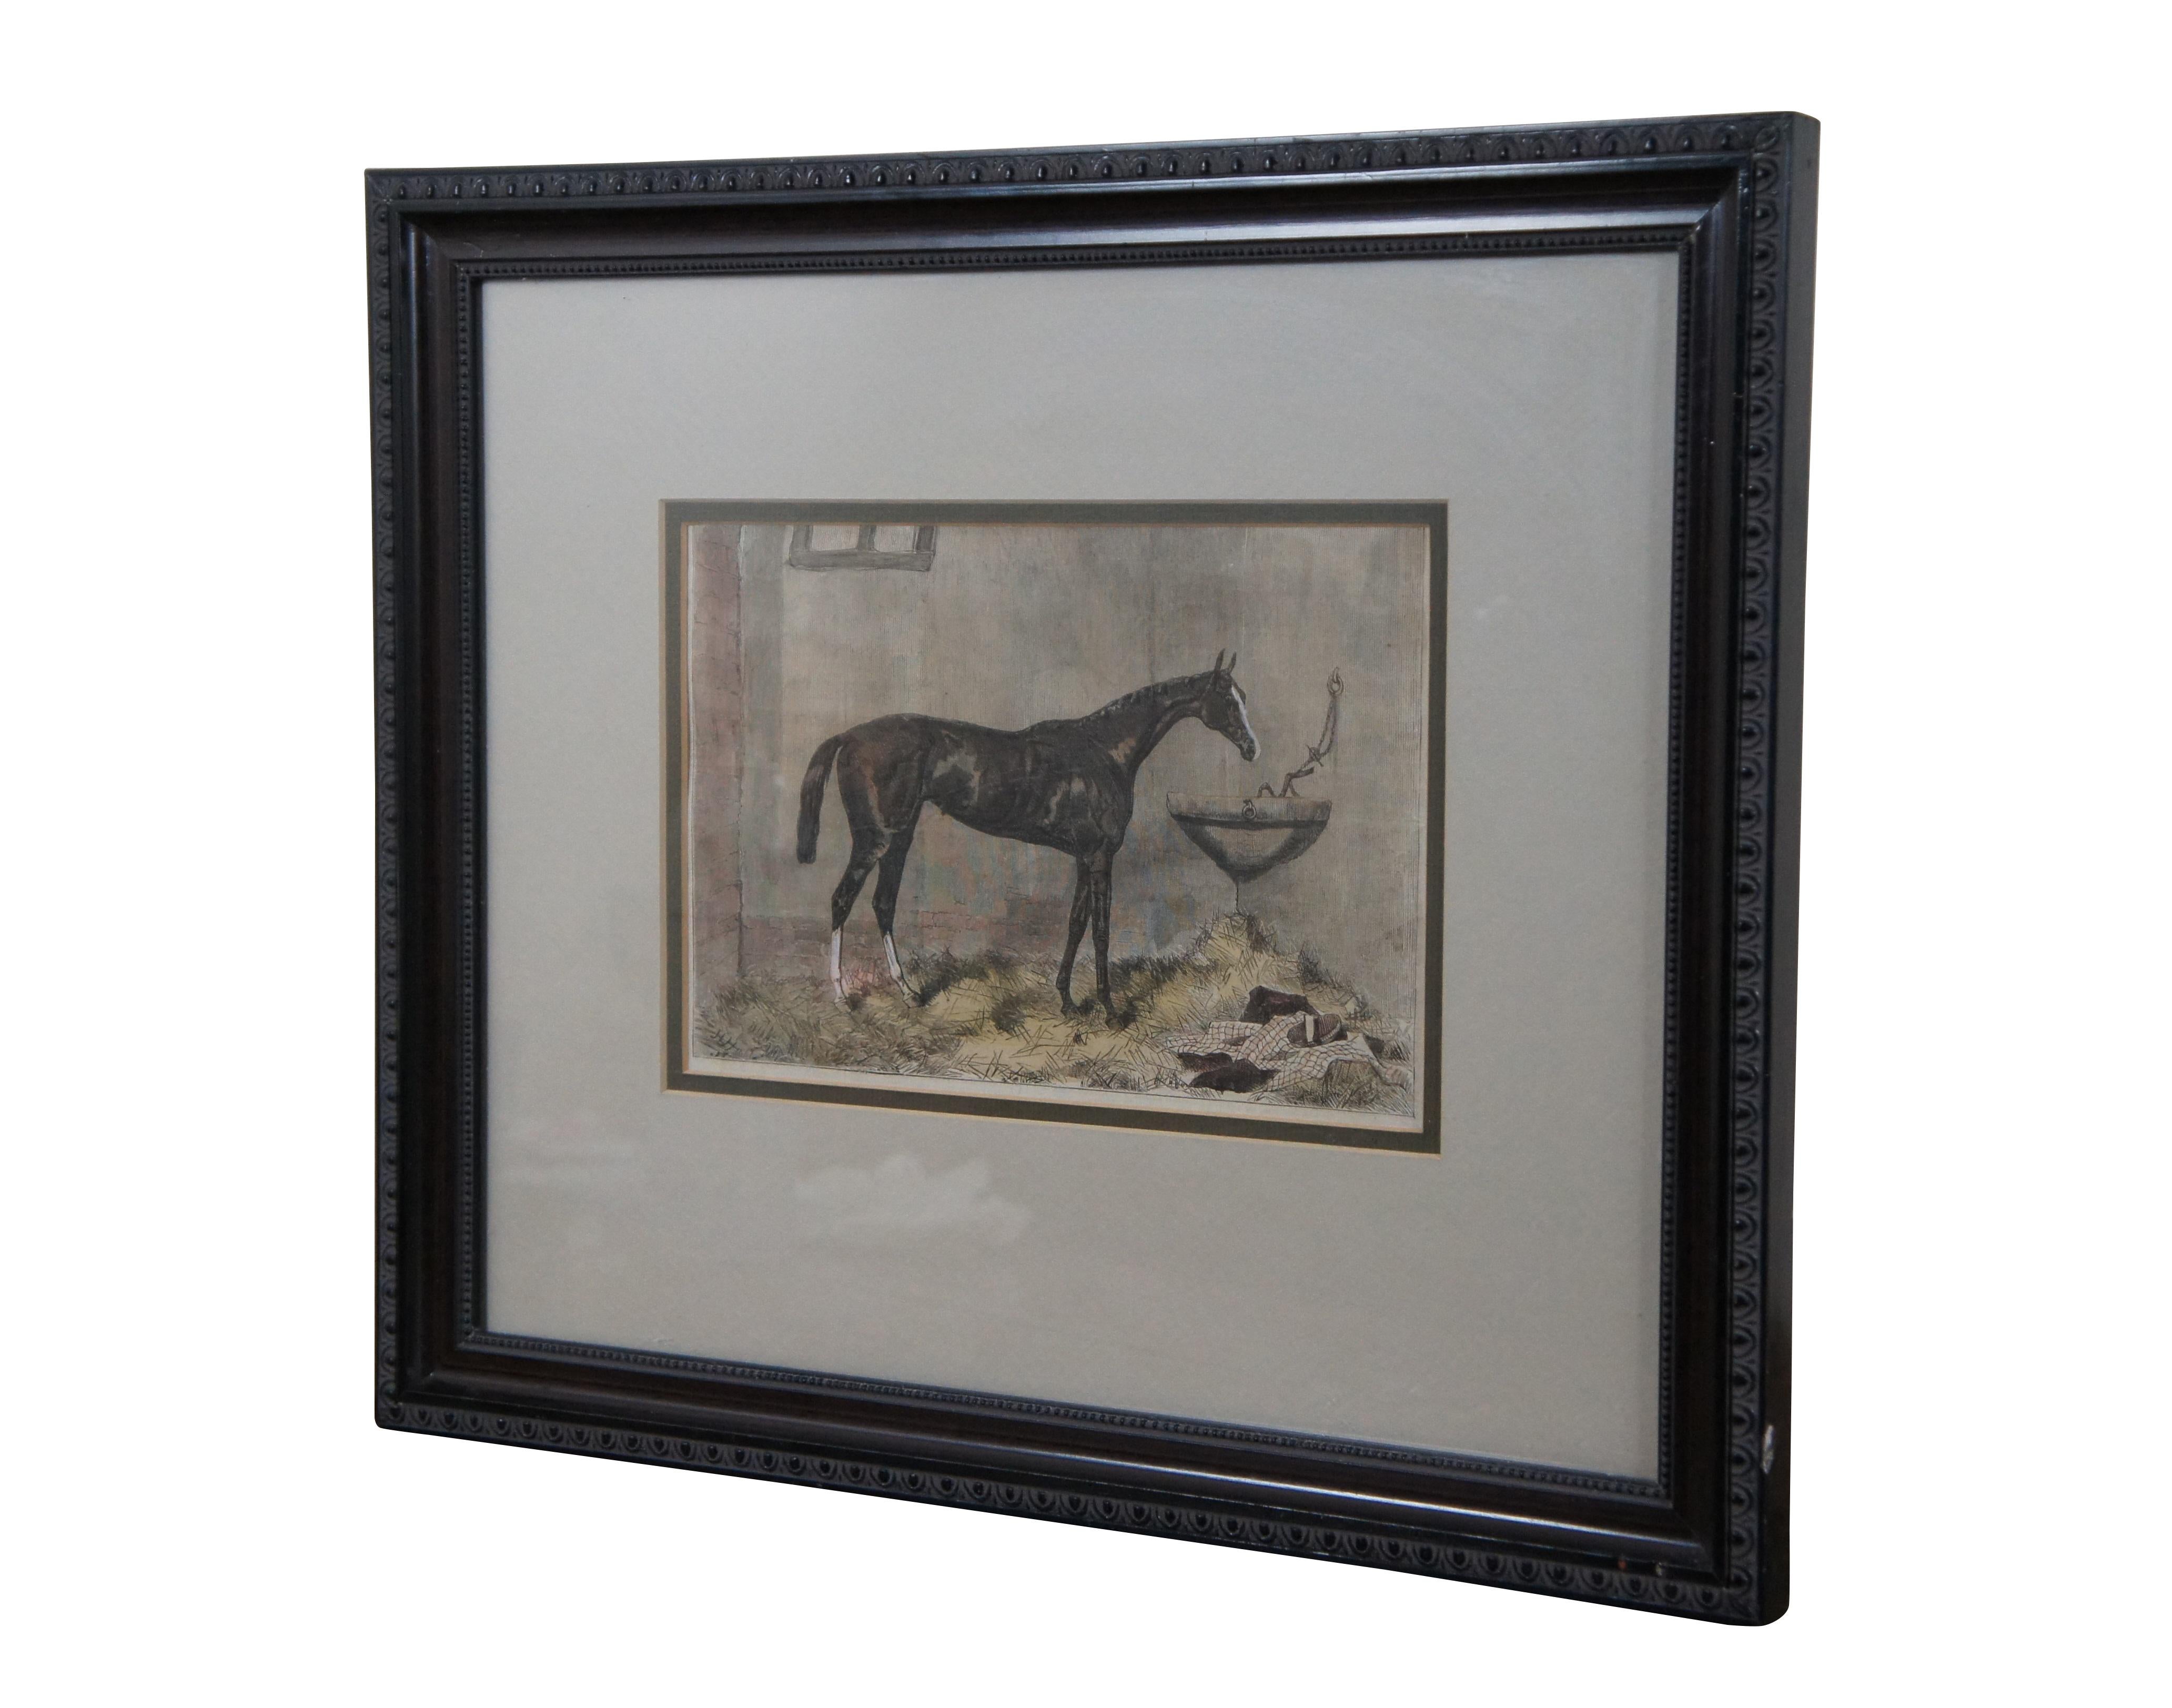 Framed mid 19th century hand colored engraving depicting 